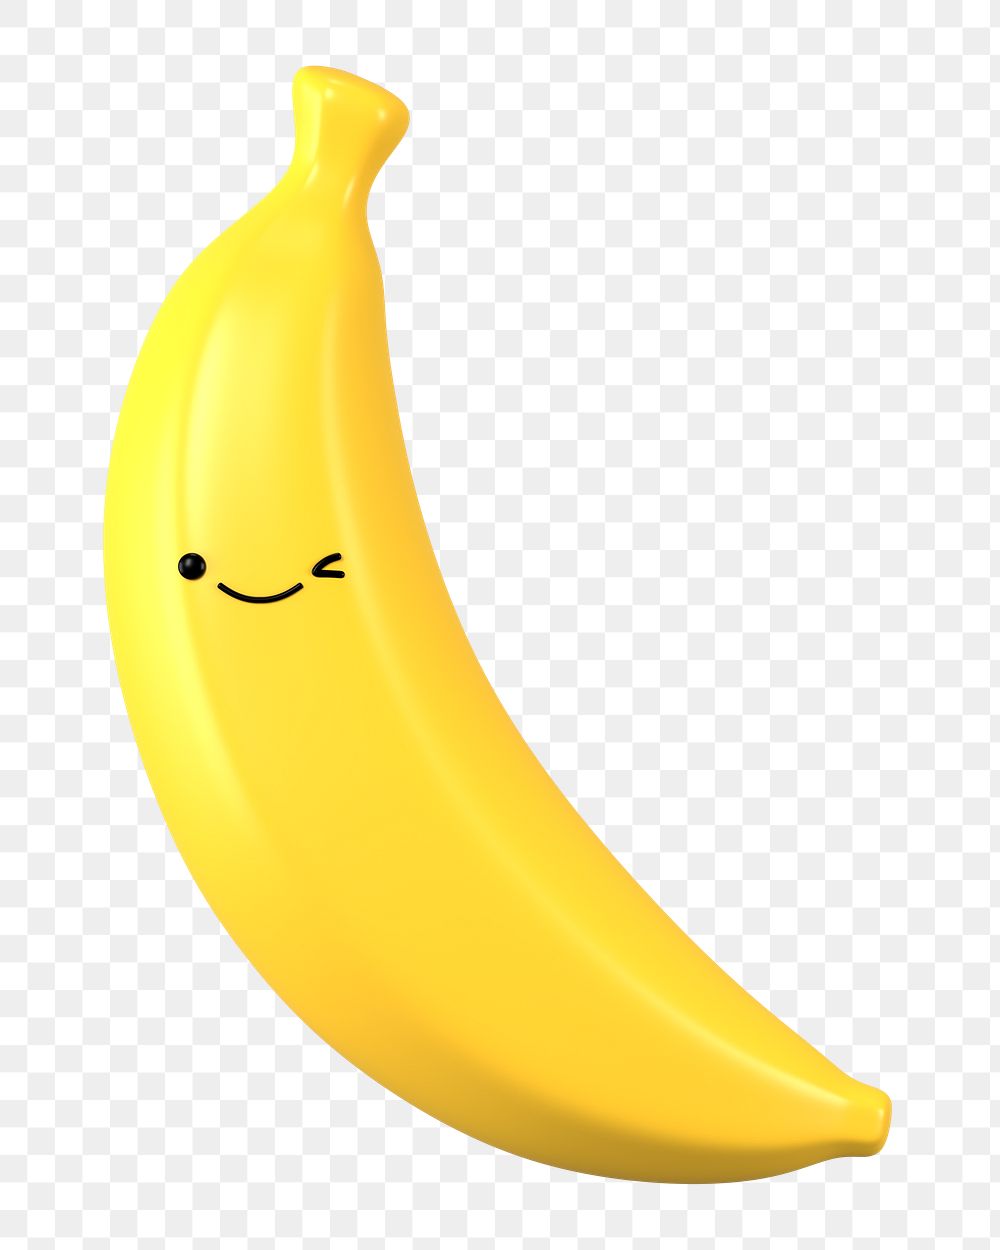 3D banana png winking face emoticon, transparent background